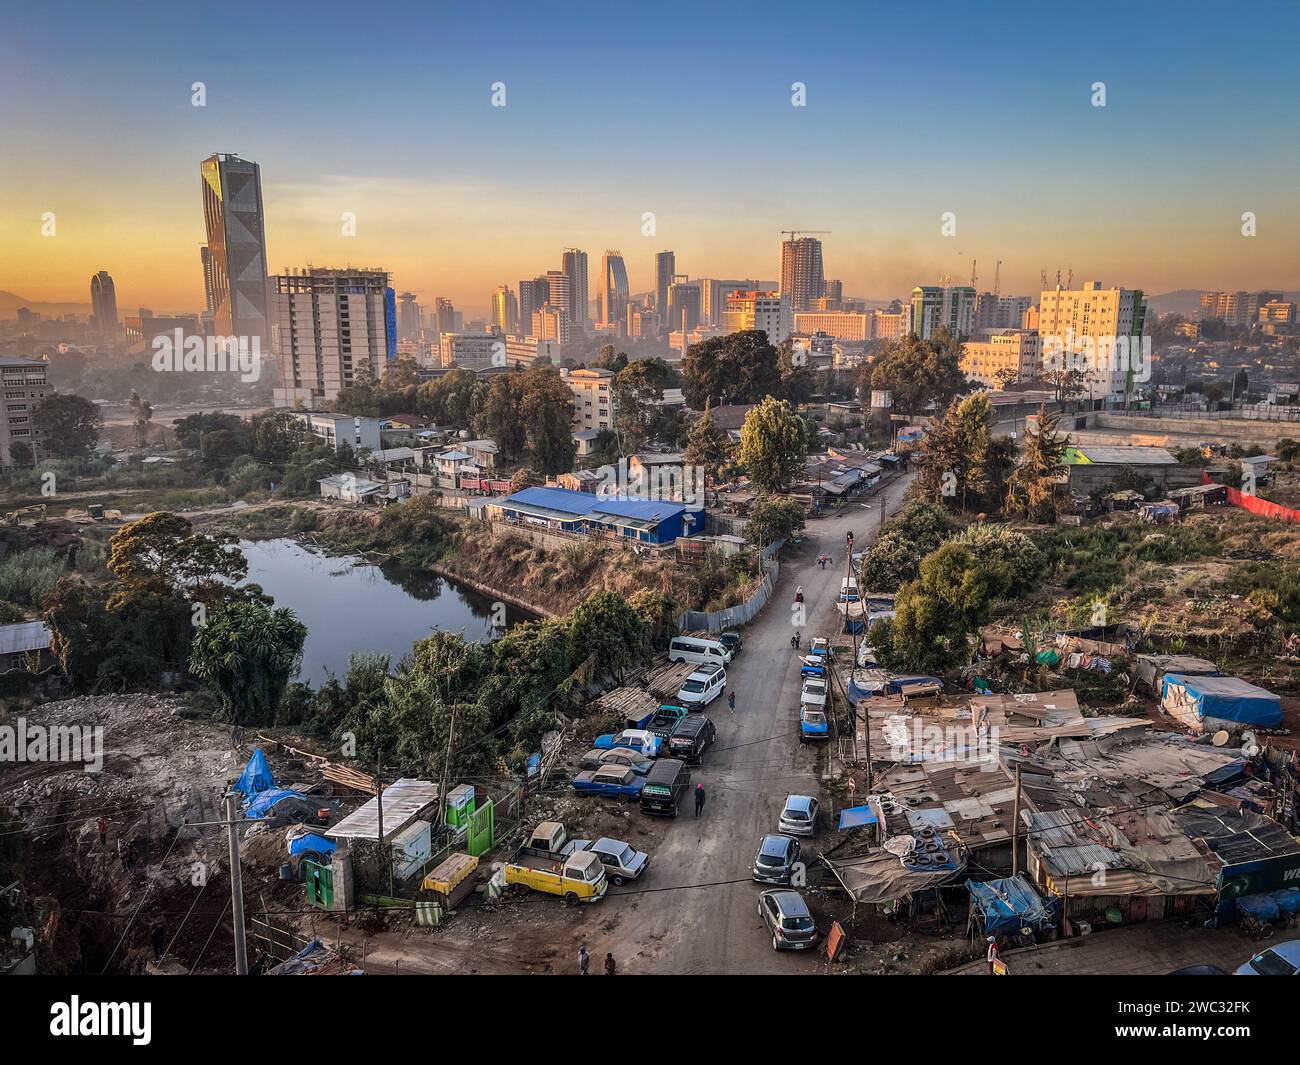 Aerial overview of Addis Abeba city, the capital of Ethiopia, showing brand new buildings and construction in the foreground, city centre and suburbs, Stock Photo